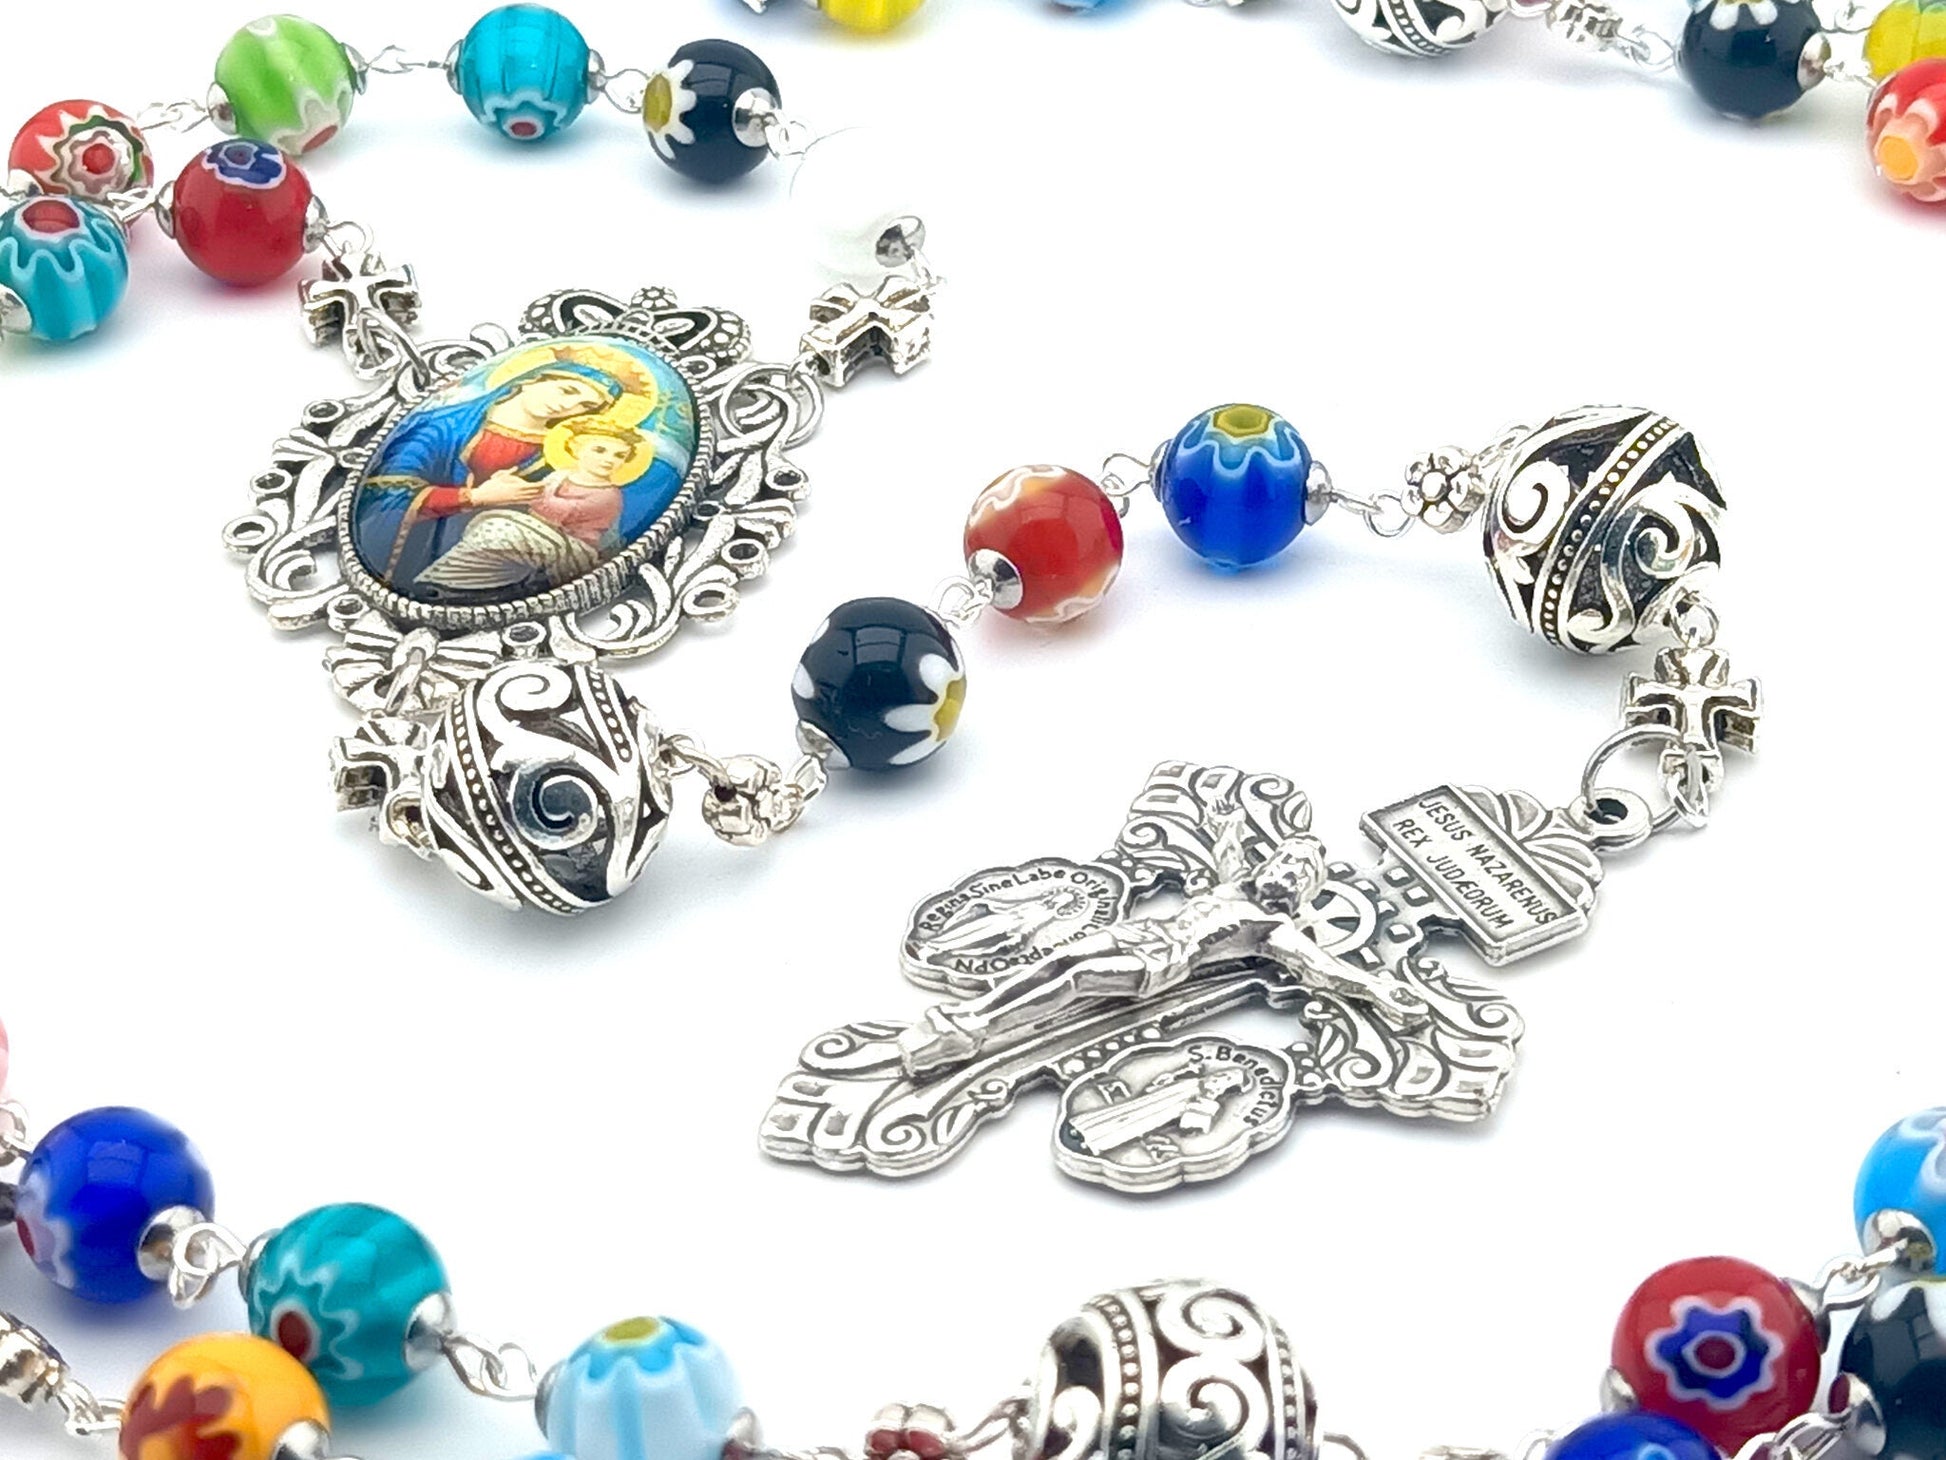 Our Lady of Perpetual Help unique rosary beads with millefleur glass beads, silver pater beads, pardon crucifix and picture centre medal.